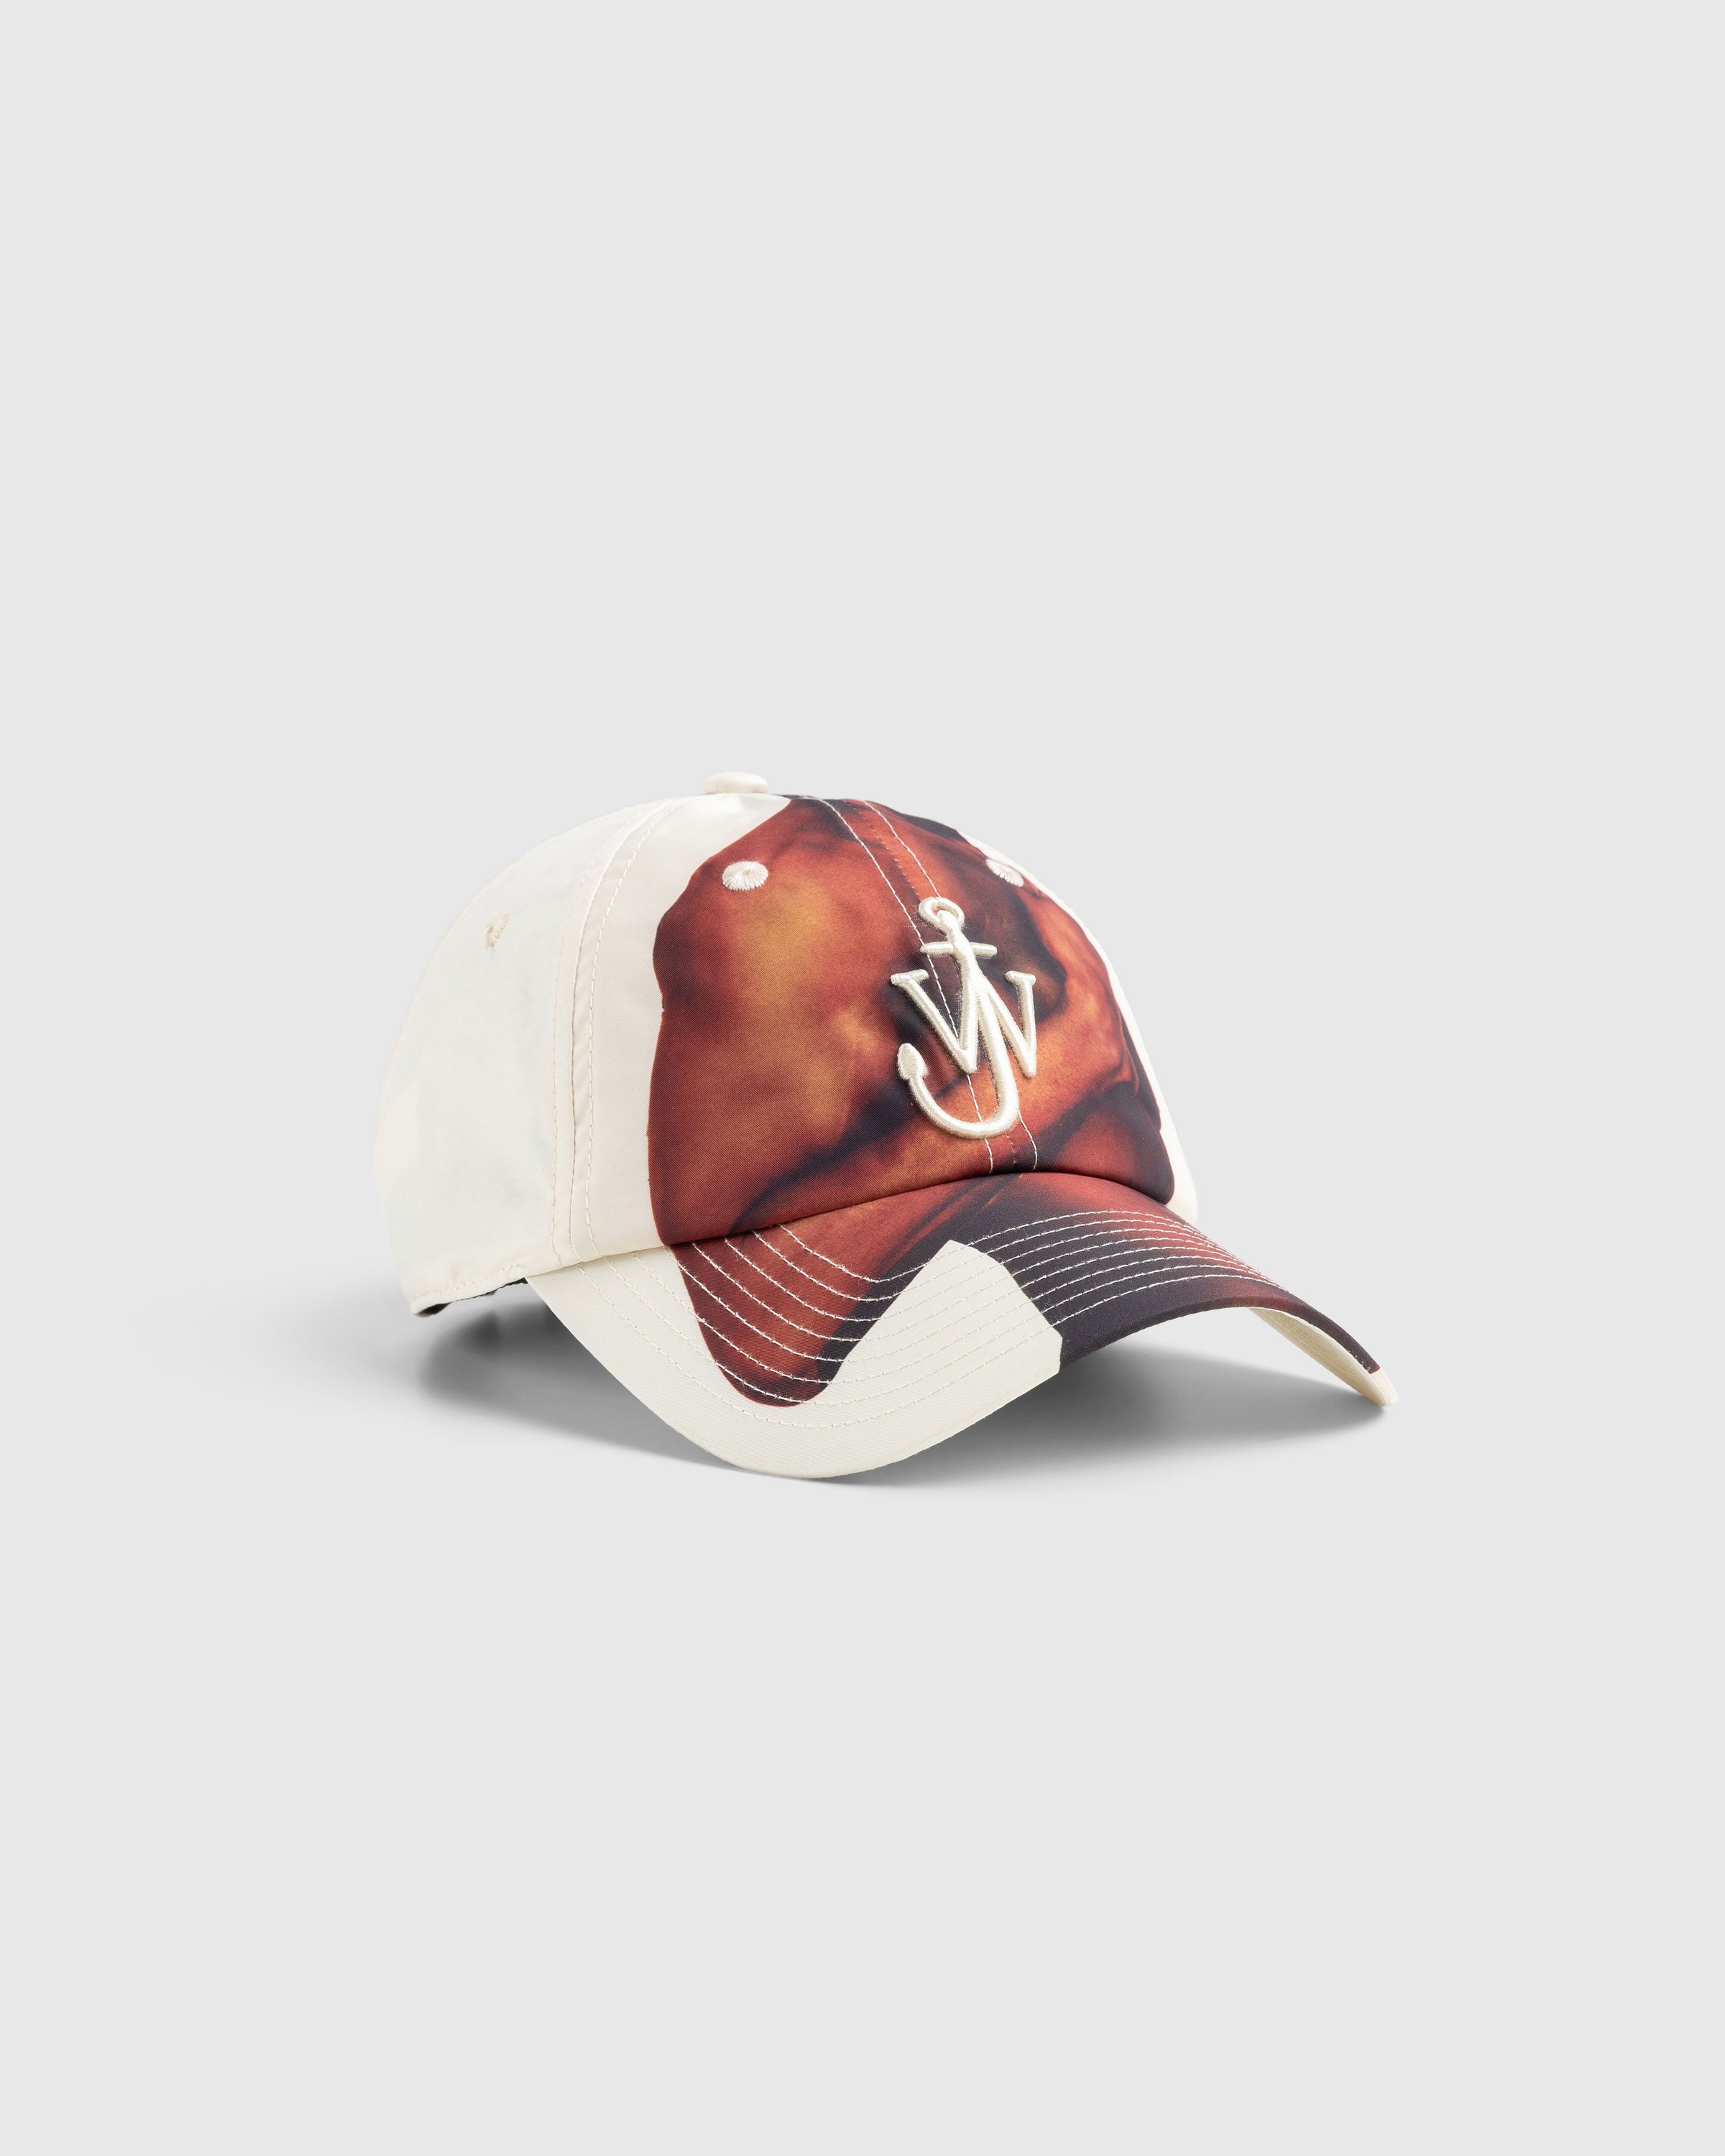 J.W. Anderson - Logo Embroidered Baseball Cap Off White - Accessories - White - Image 1